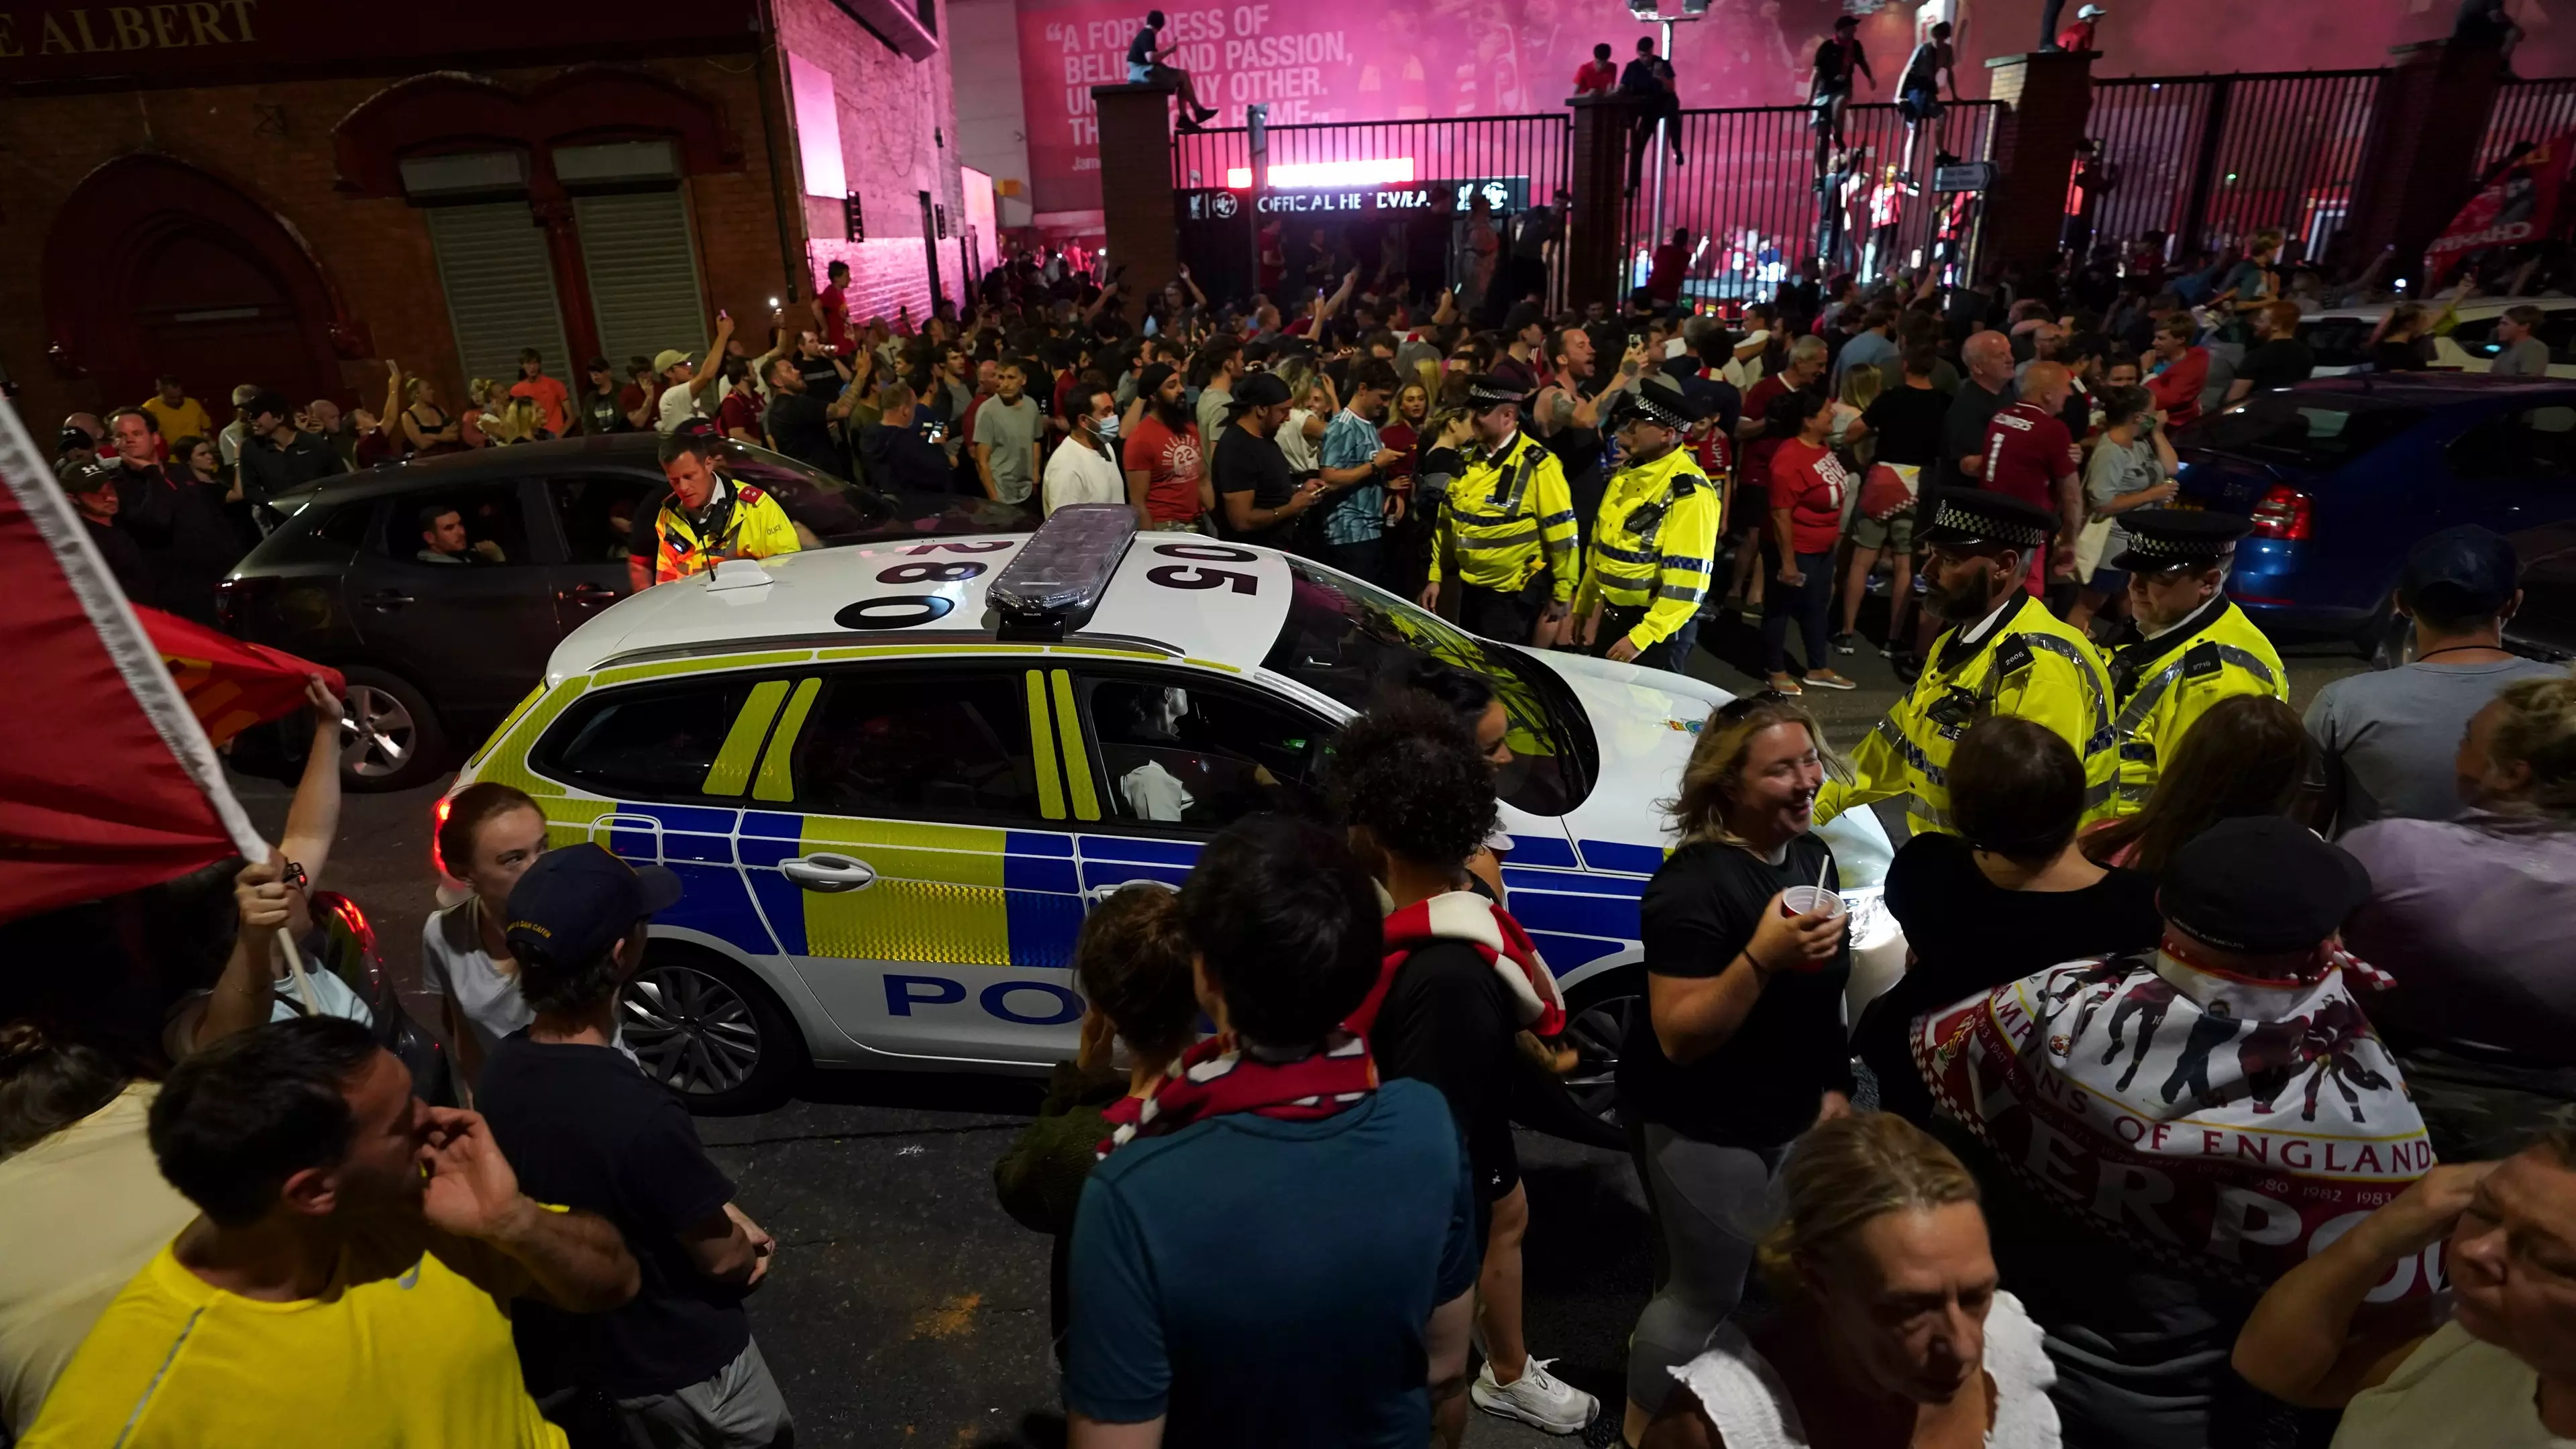 Police Slam Thousands Of Liverpool Fans For Filling Streets Amid Coronavirus Crisis